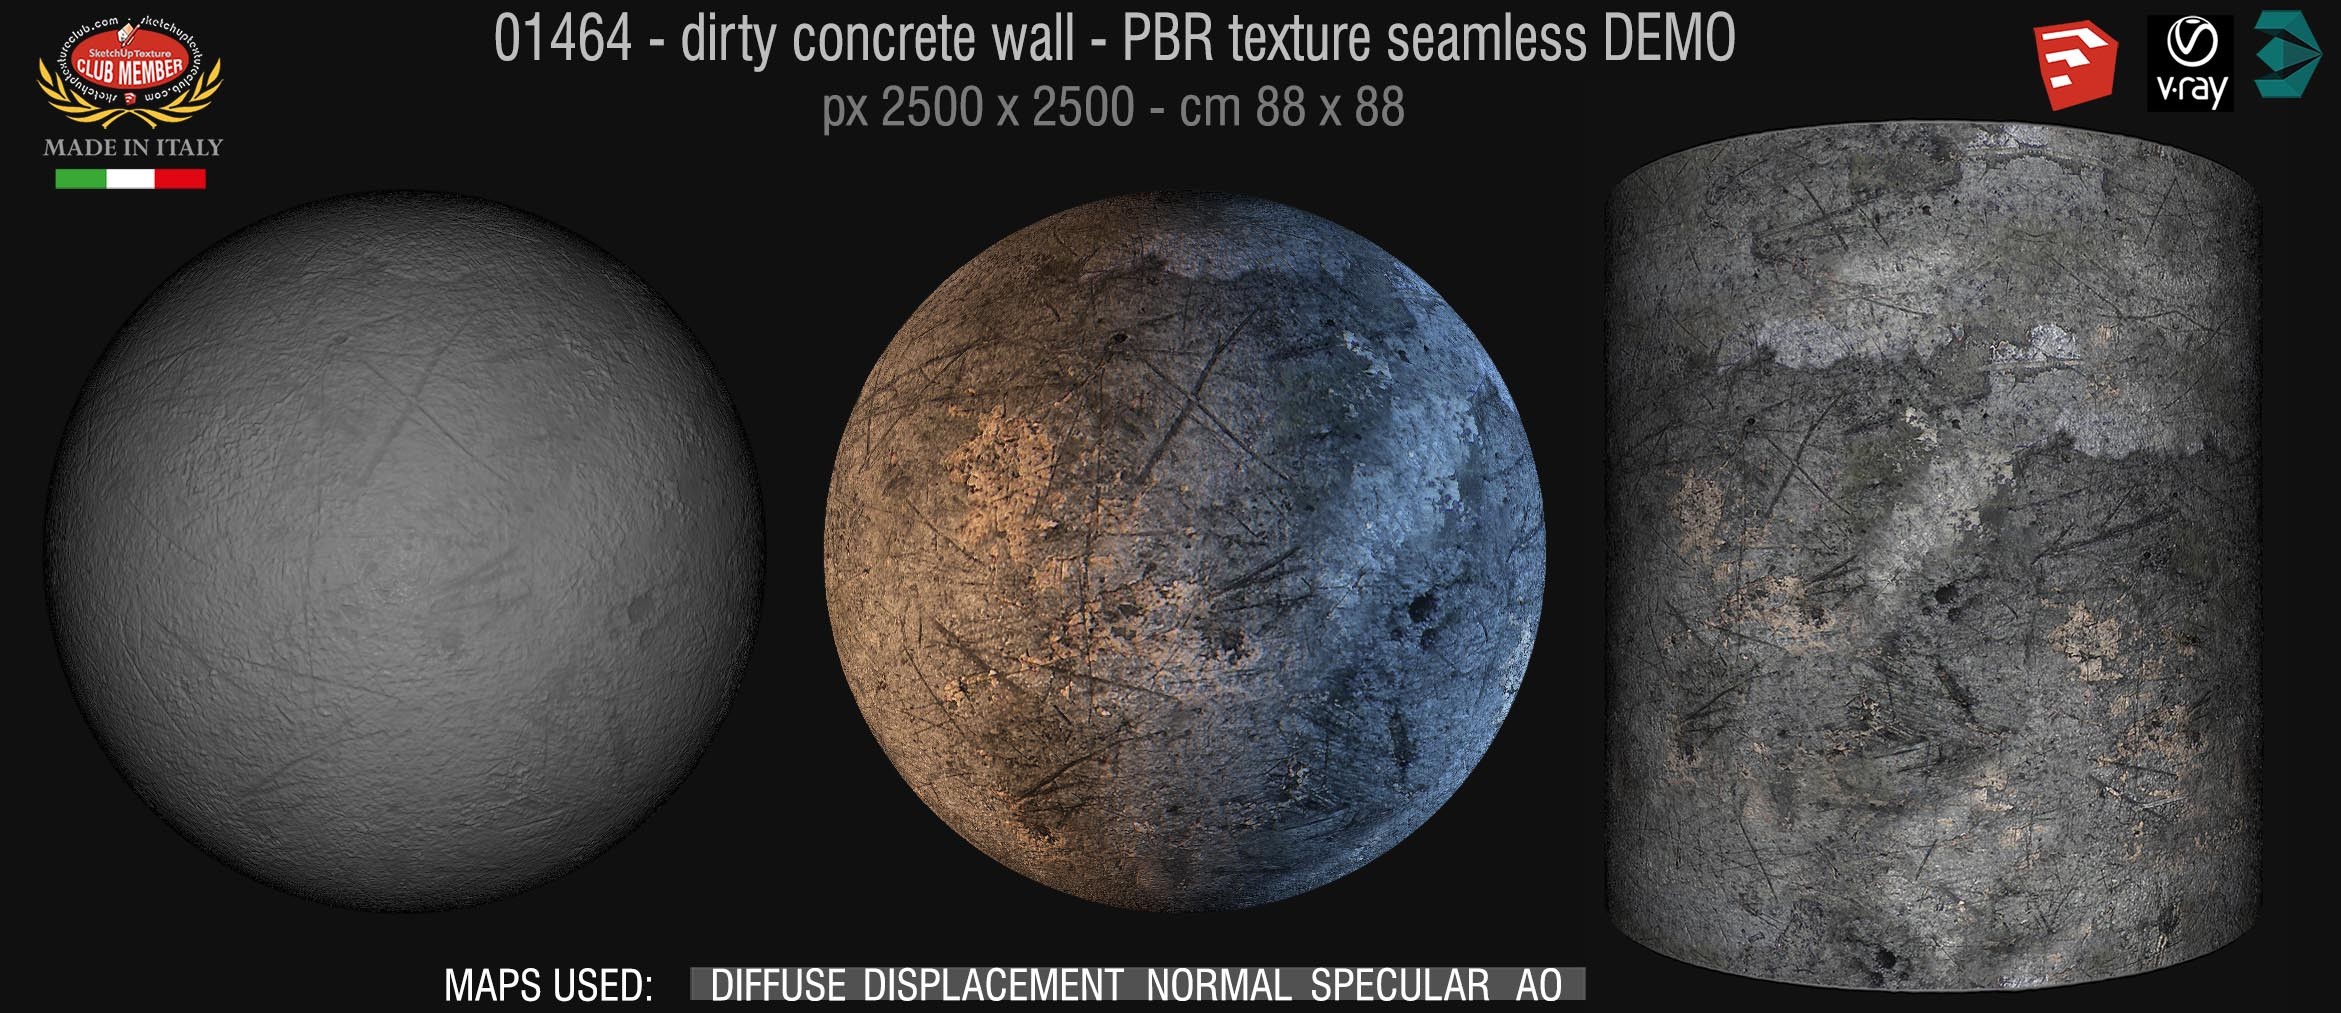 01464 Concrete bare dirty wall PBR texture seamless DEMO